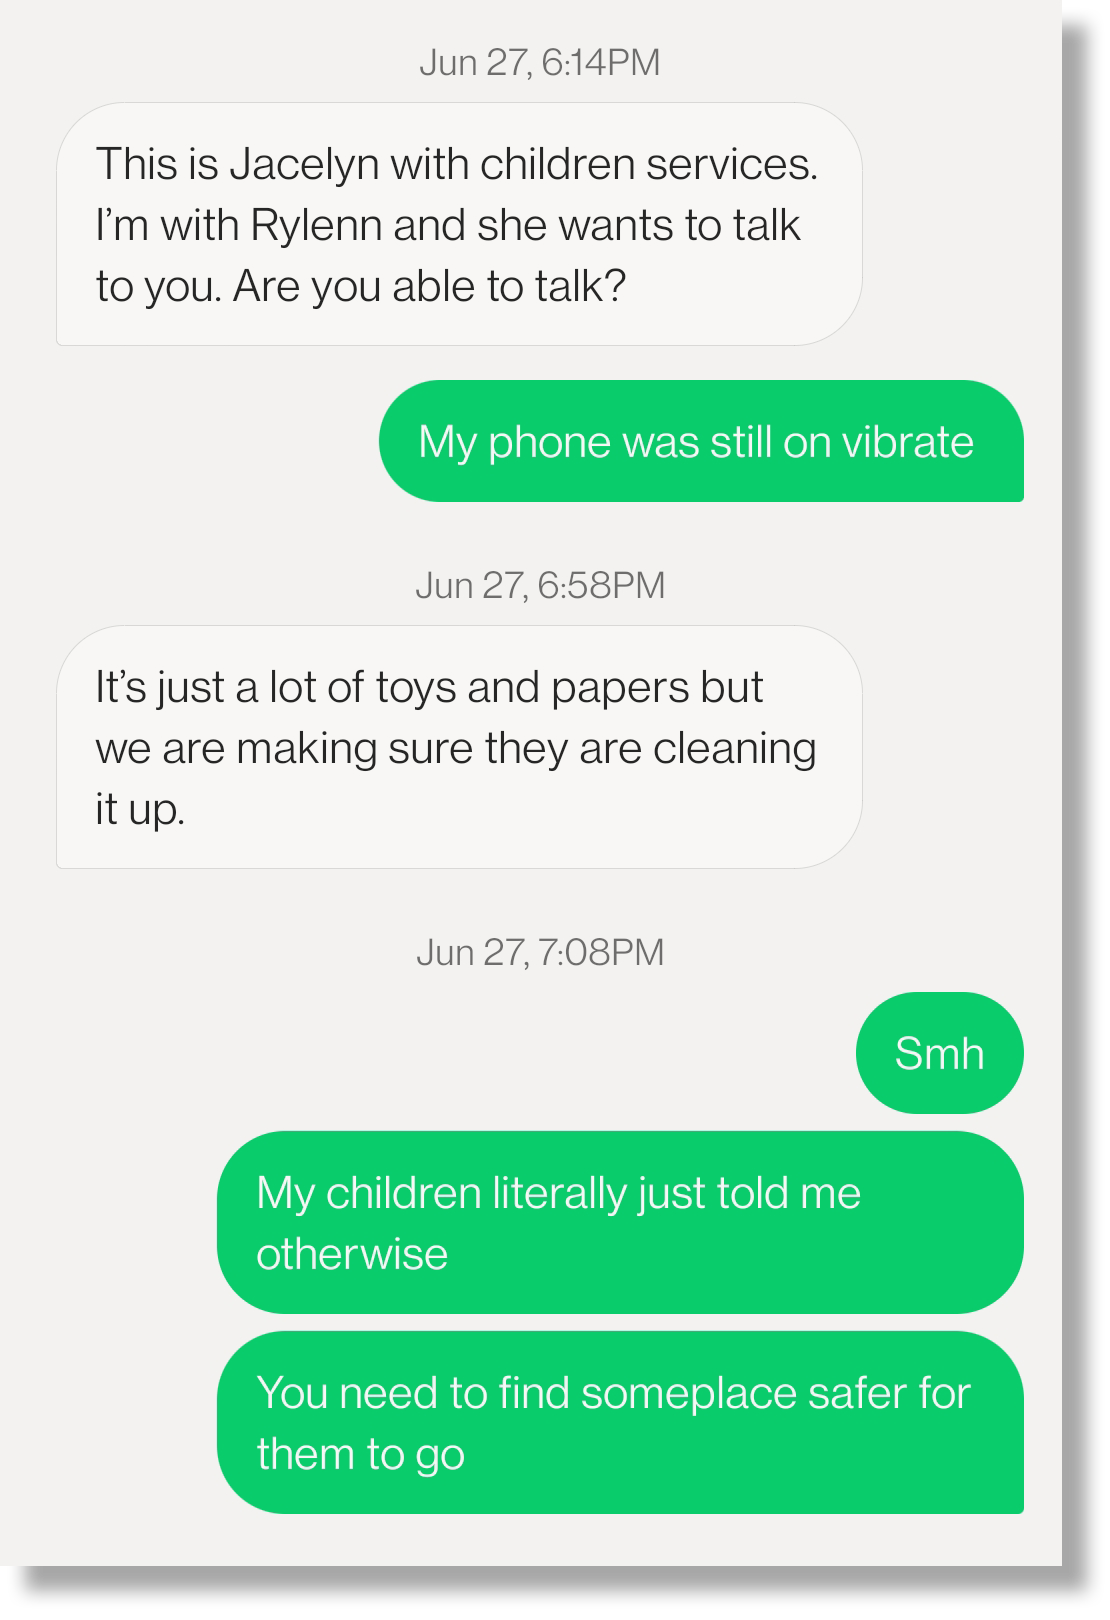 A text exchange between Jacelyn McGaughey and Theresa Fogel about the foster home